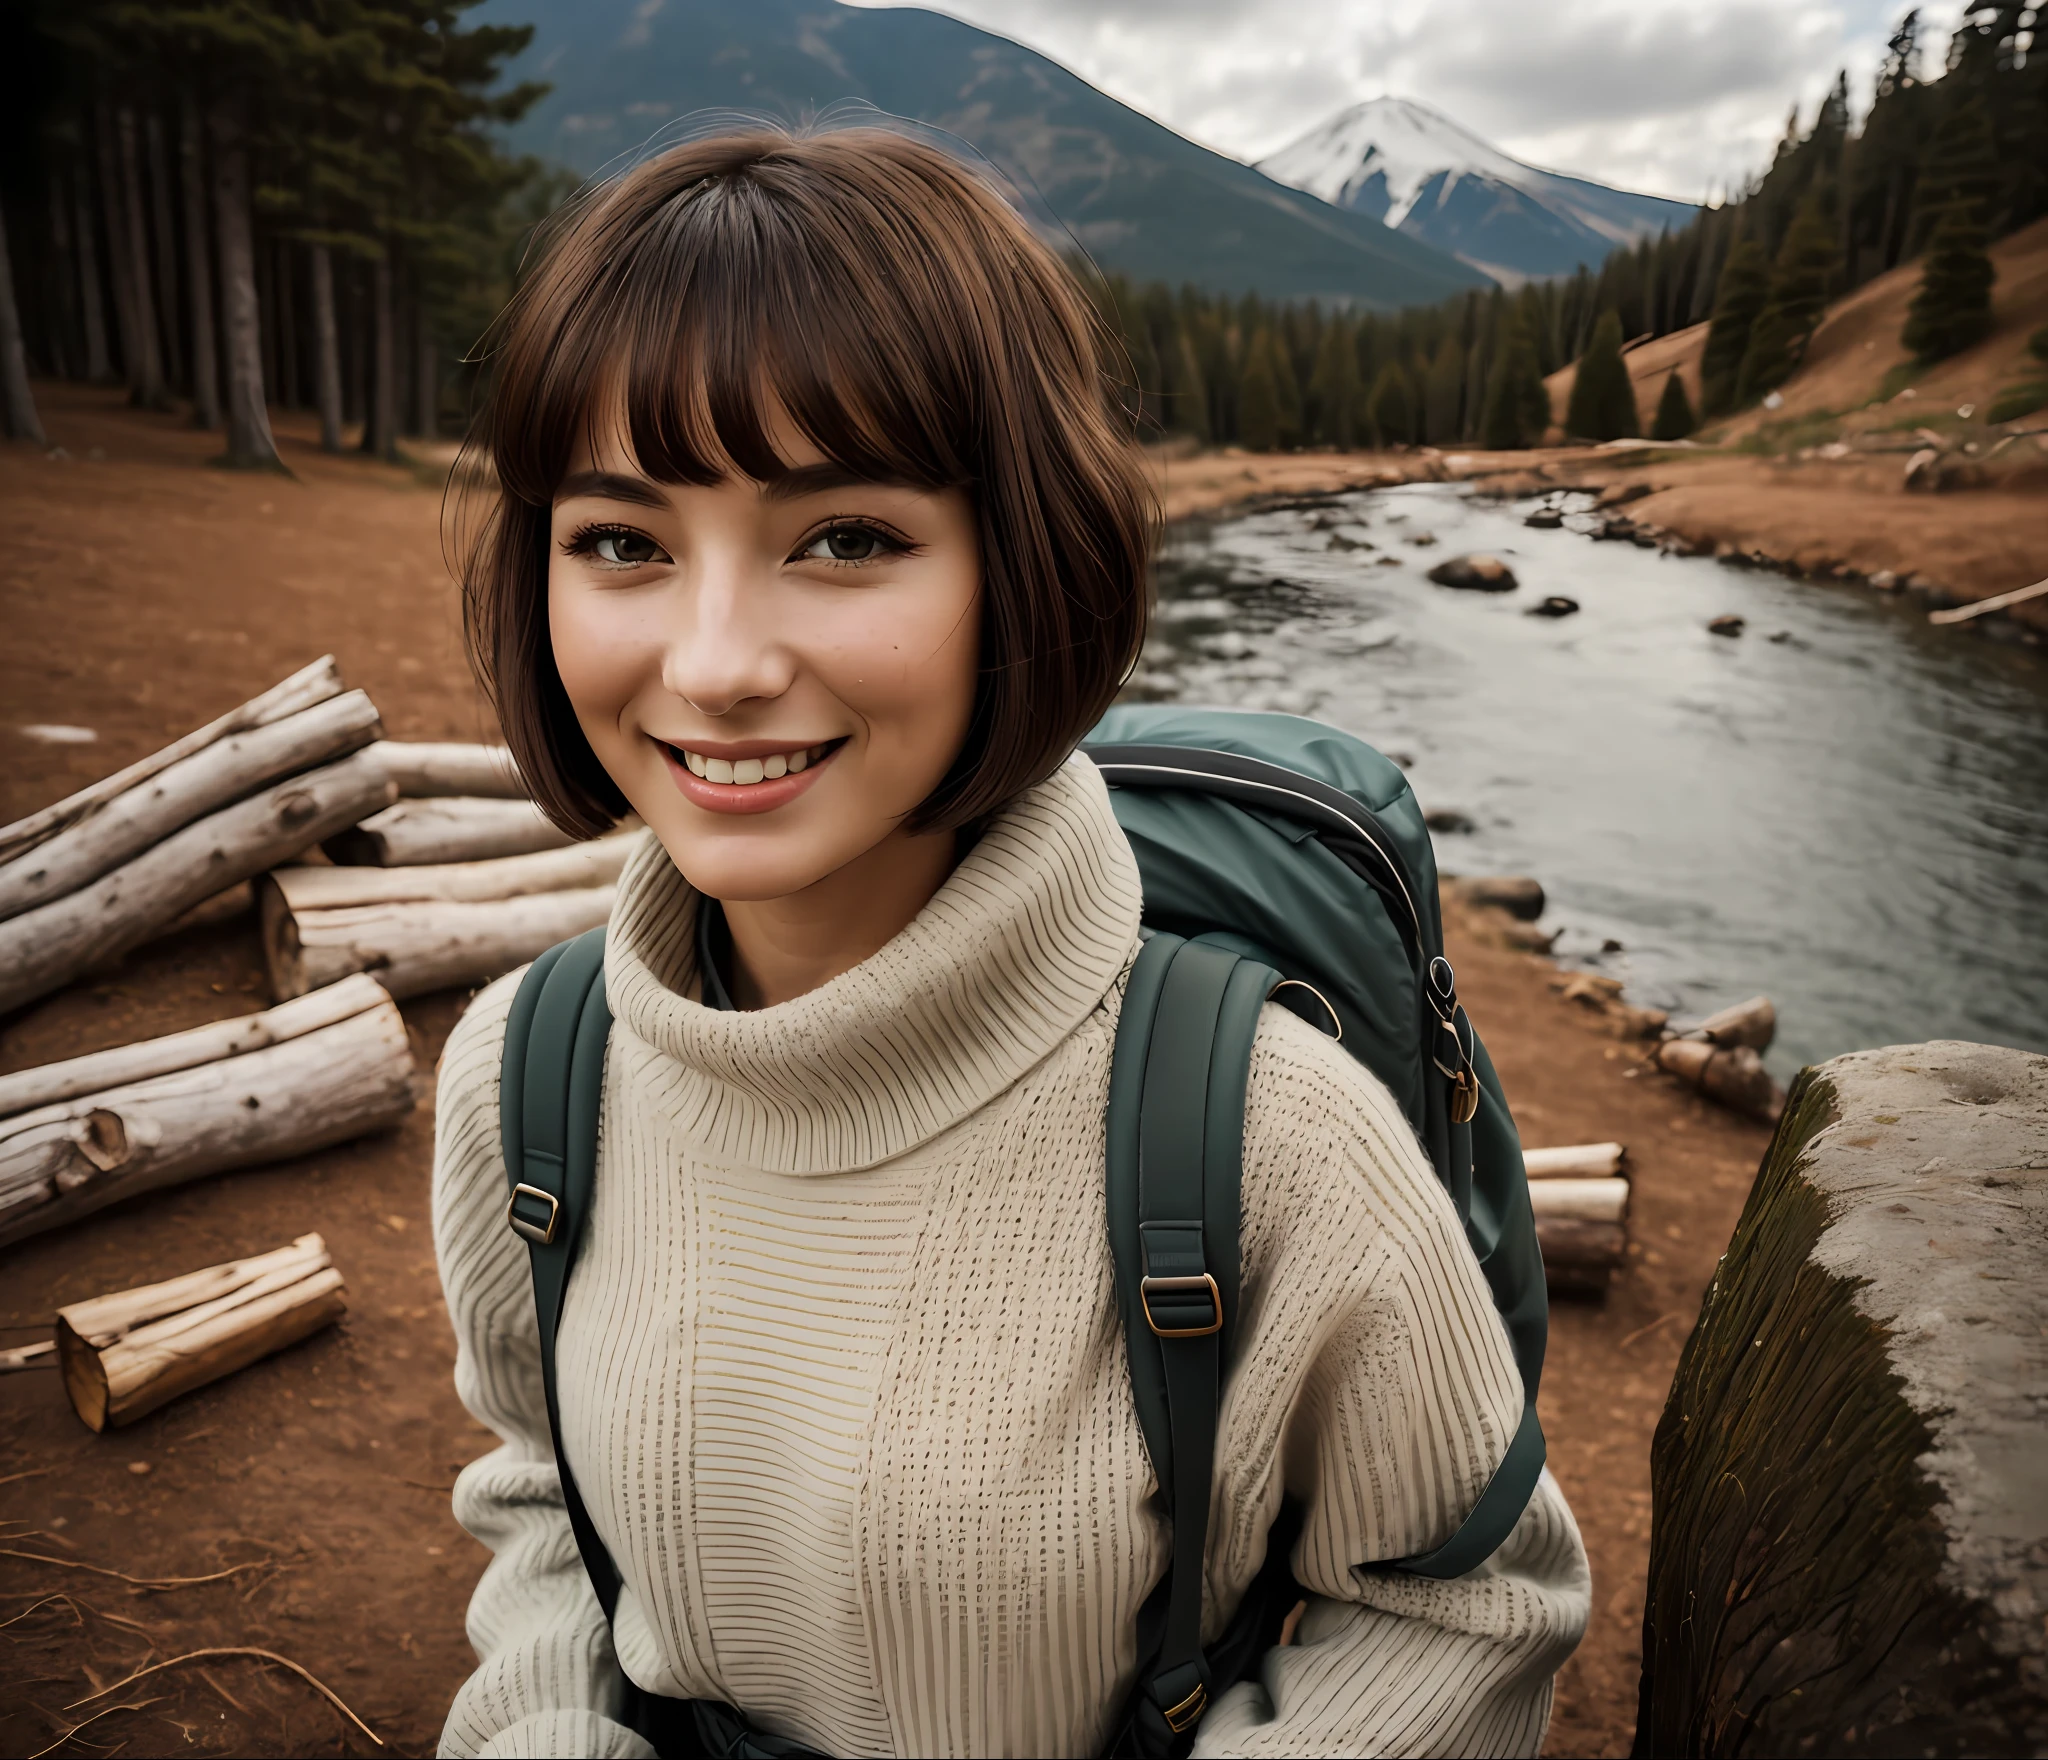 ((top quality, 8k, masterpiece: 1.3)), one cute Japan woman (happy smile, highly detailed face and skin and hair texture, detailed eyes, double eyelids, white skin, beautiful delicate nose), cute woman: 1.4, ((bob-cut hair (brown)), overhead camera, sharp focus: 1.2, pleasant to the eye, while emphasizing the subject's hair, eyes, mouth, action, It is a thought-provoking composition. ⠀
ground, outdoor, (night), mountain, nature, cheerful, happy, backpack, sleep, bag, camping stove, mountain boots, gloves, sweater, hat, lantern, forest, stone, river, wood, firewood, smoke, shadow, contrast, clear sky, style, (warm shades, warm tones)